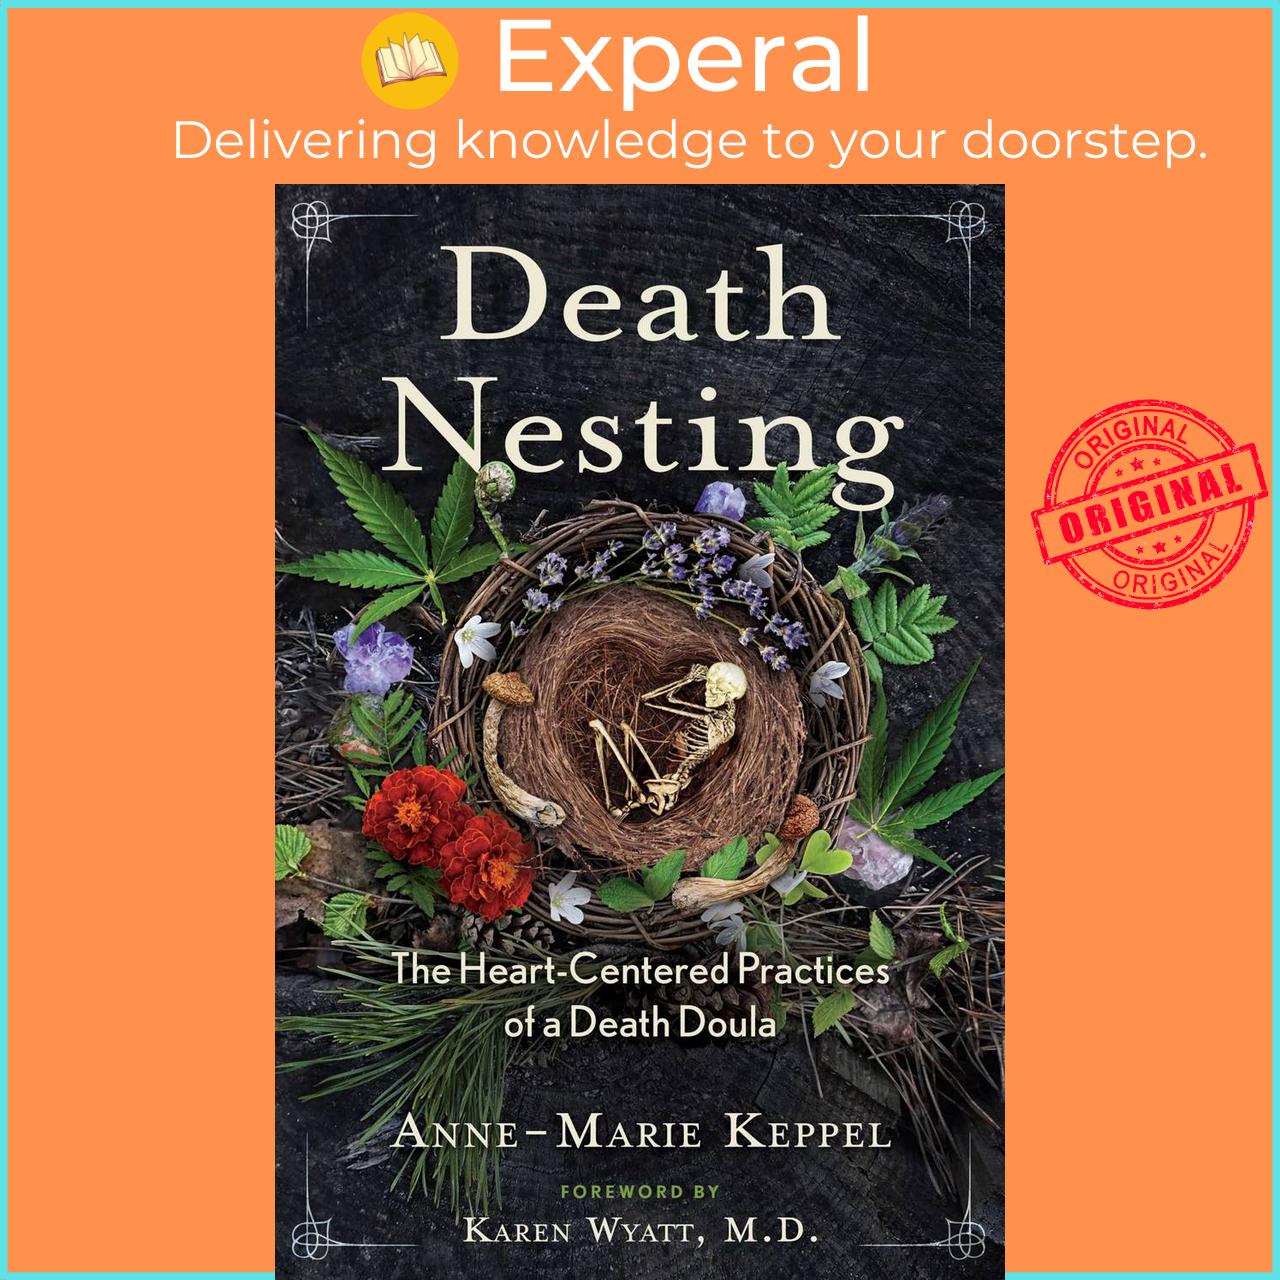 Hình ảnh Sách - Death Nesting - The Heart-Centered Practices of a Death Doula by Karen Wyatt (US edition, paperback)